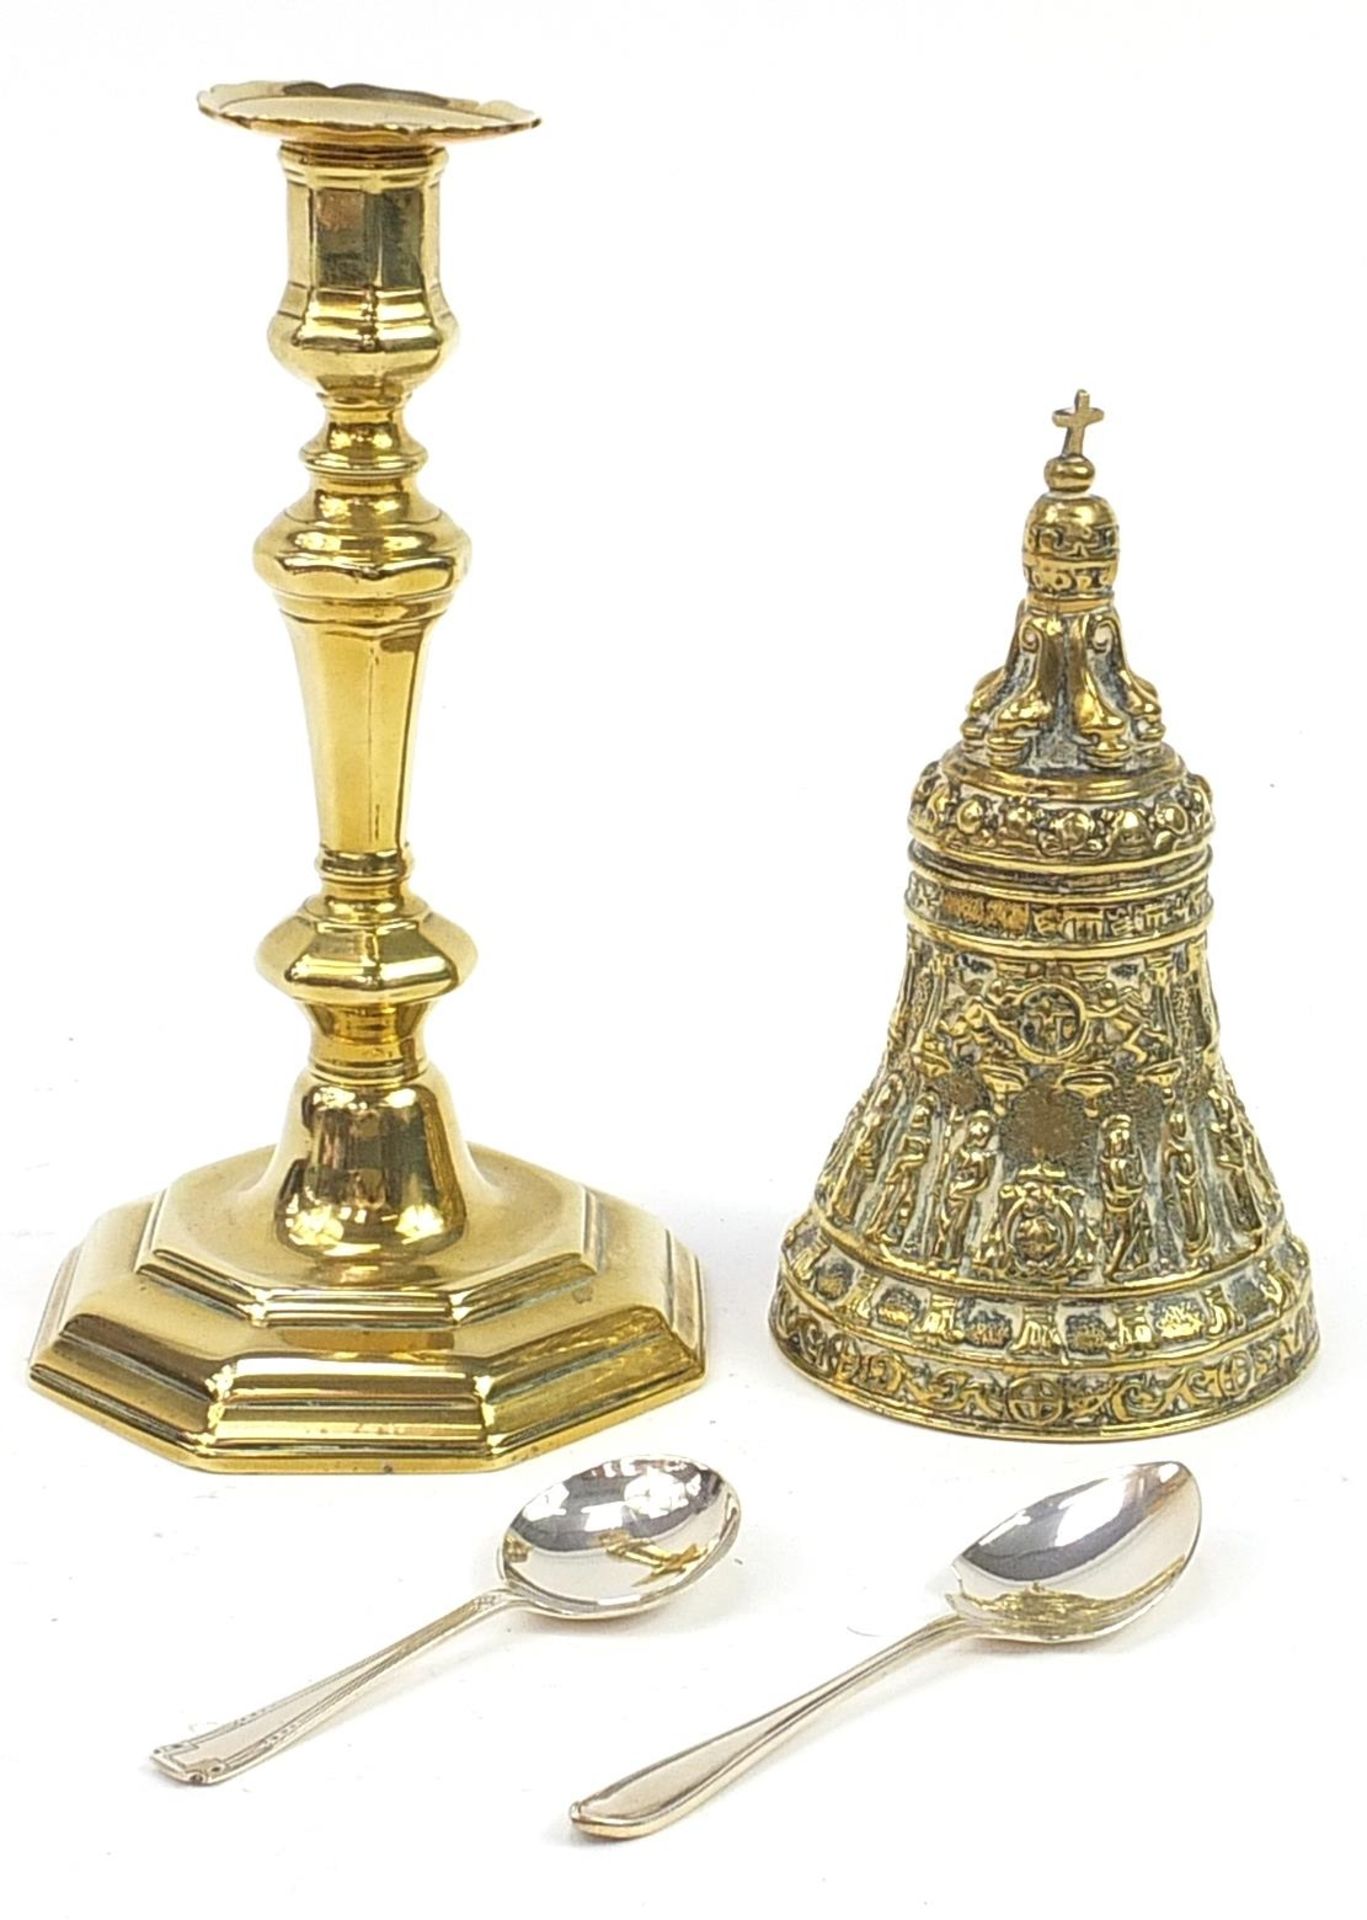 Metalware comprising a heavy gilt brass bell, candlestick and two silver spoons, the largest 23cm - Image 2 of 4